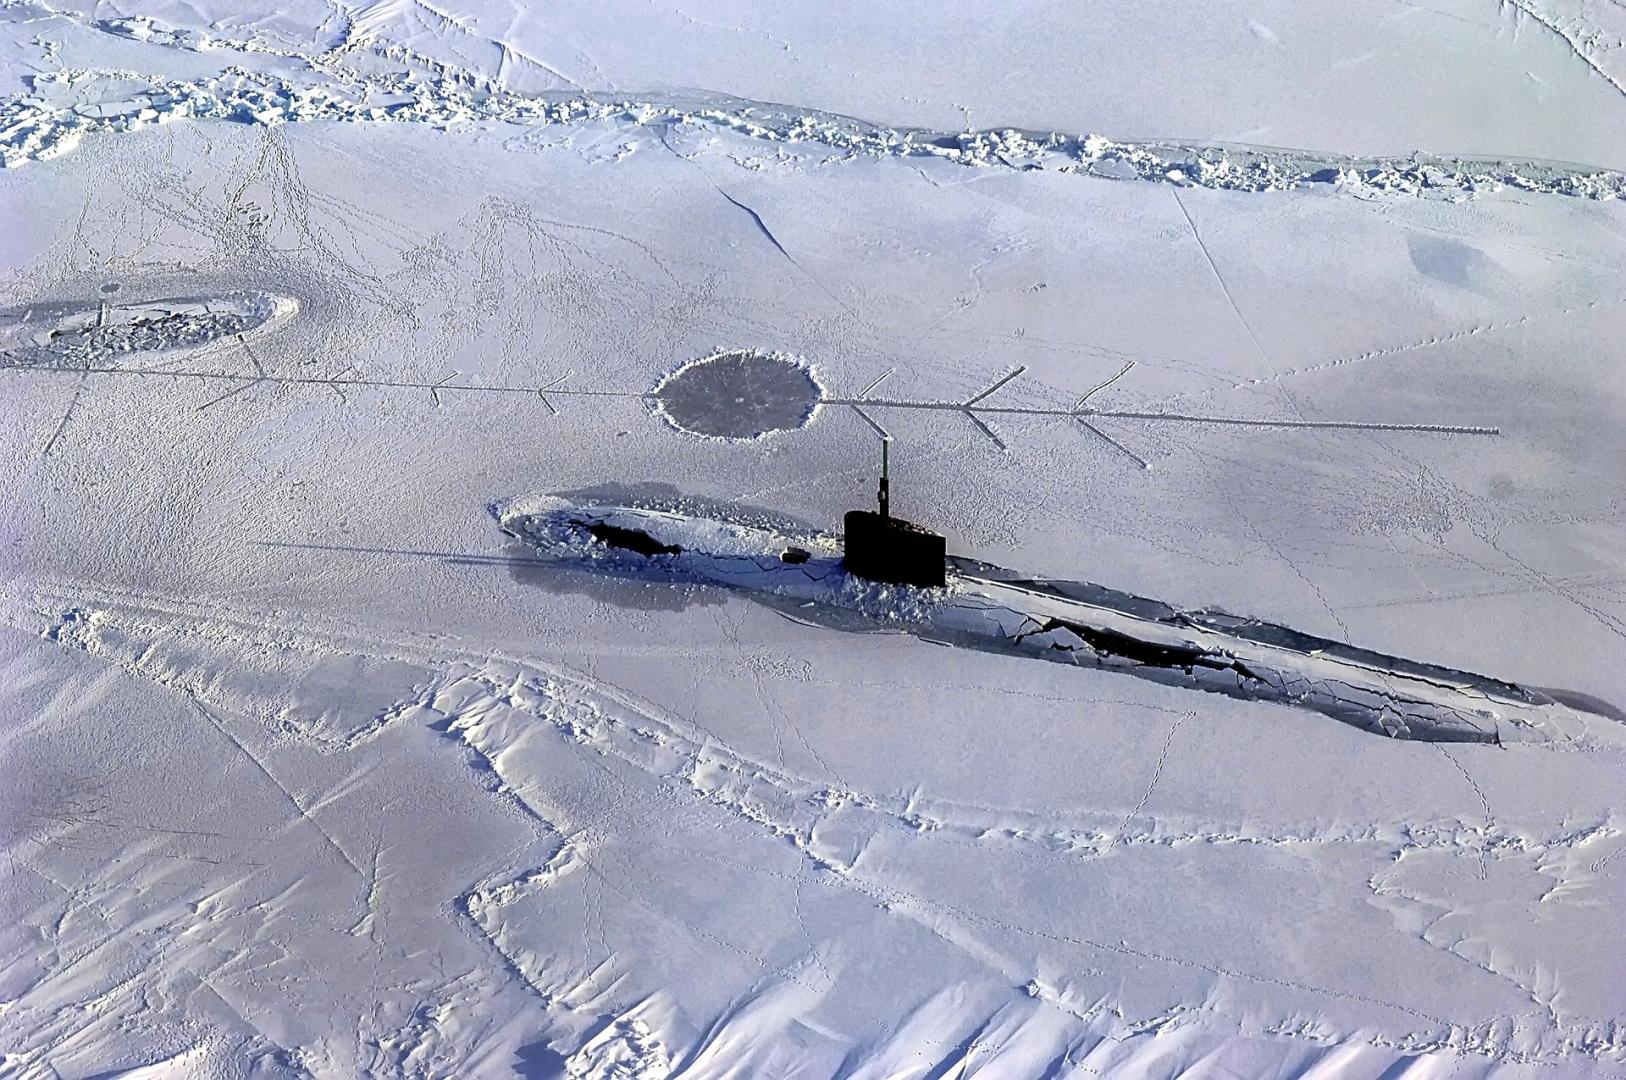 Submarine in the Arctic Ocean. Image by David Mark, Pixabay 